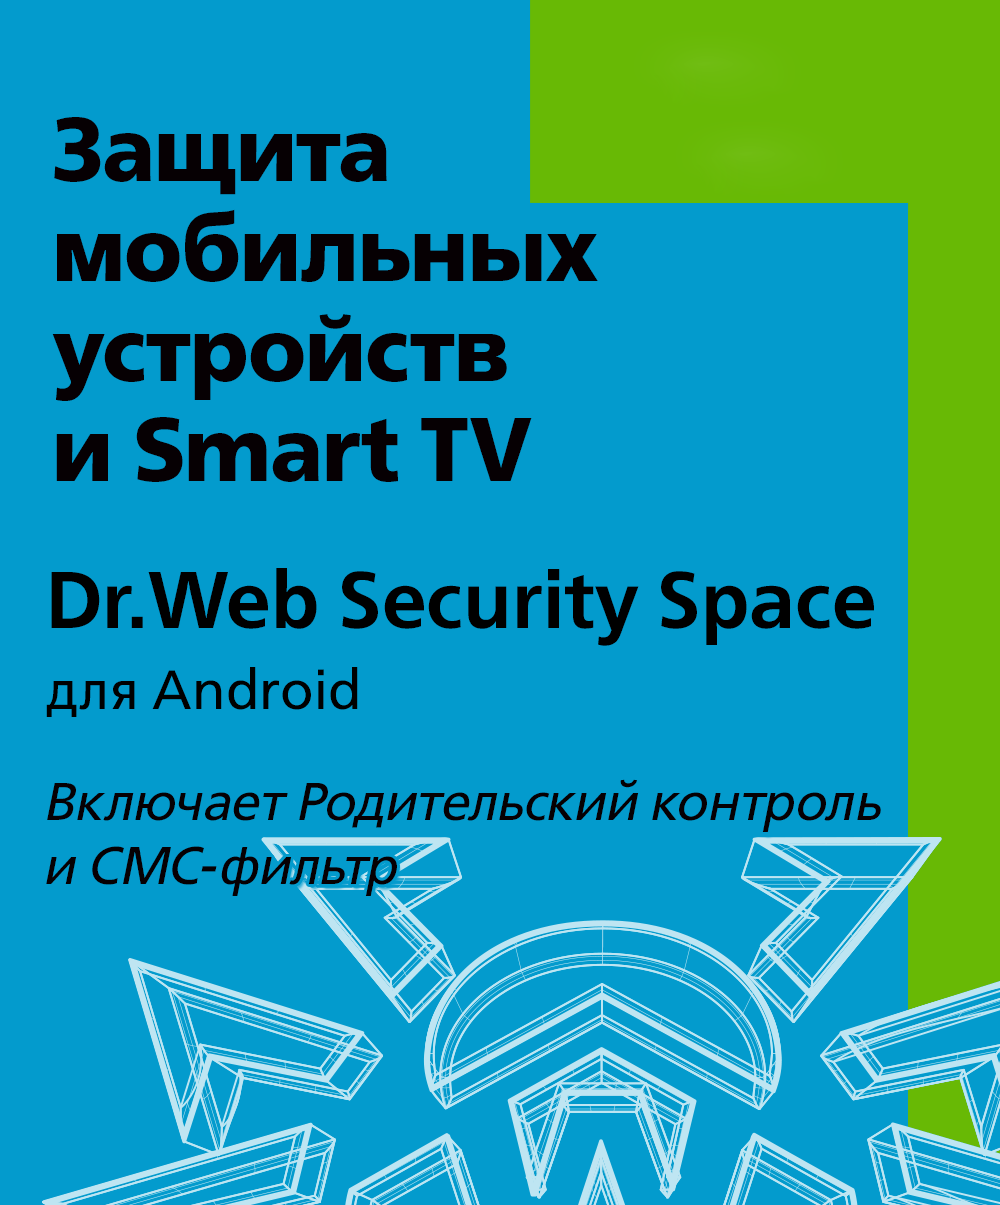 Dr.Web Security Space (for mobile devices) - for 4 devices, for 24 months, KZ